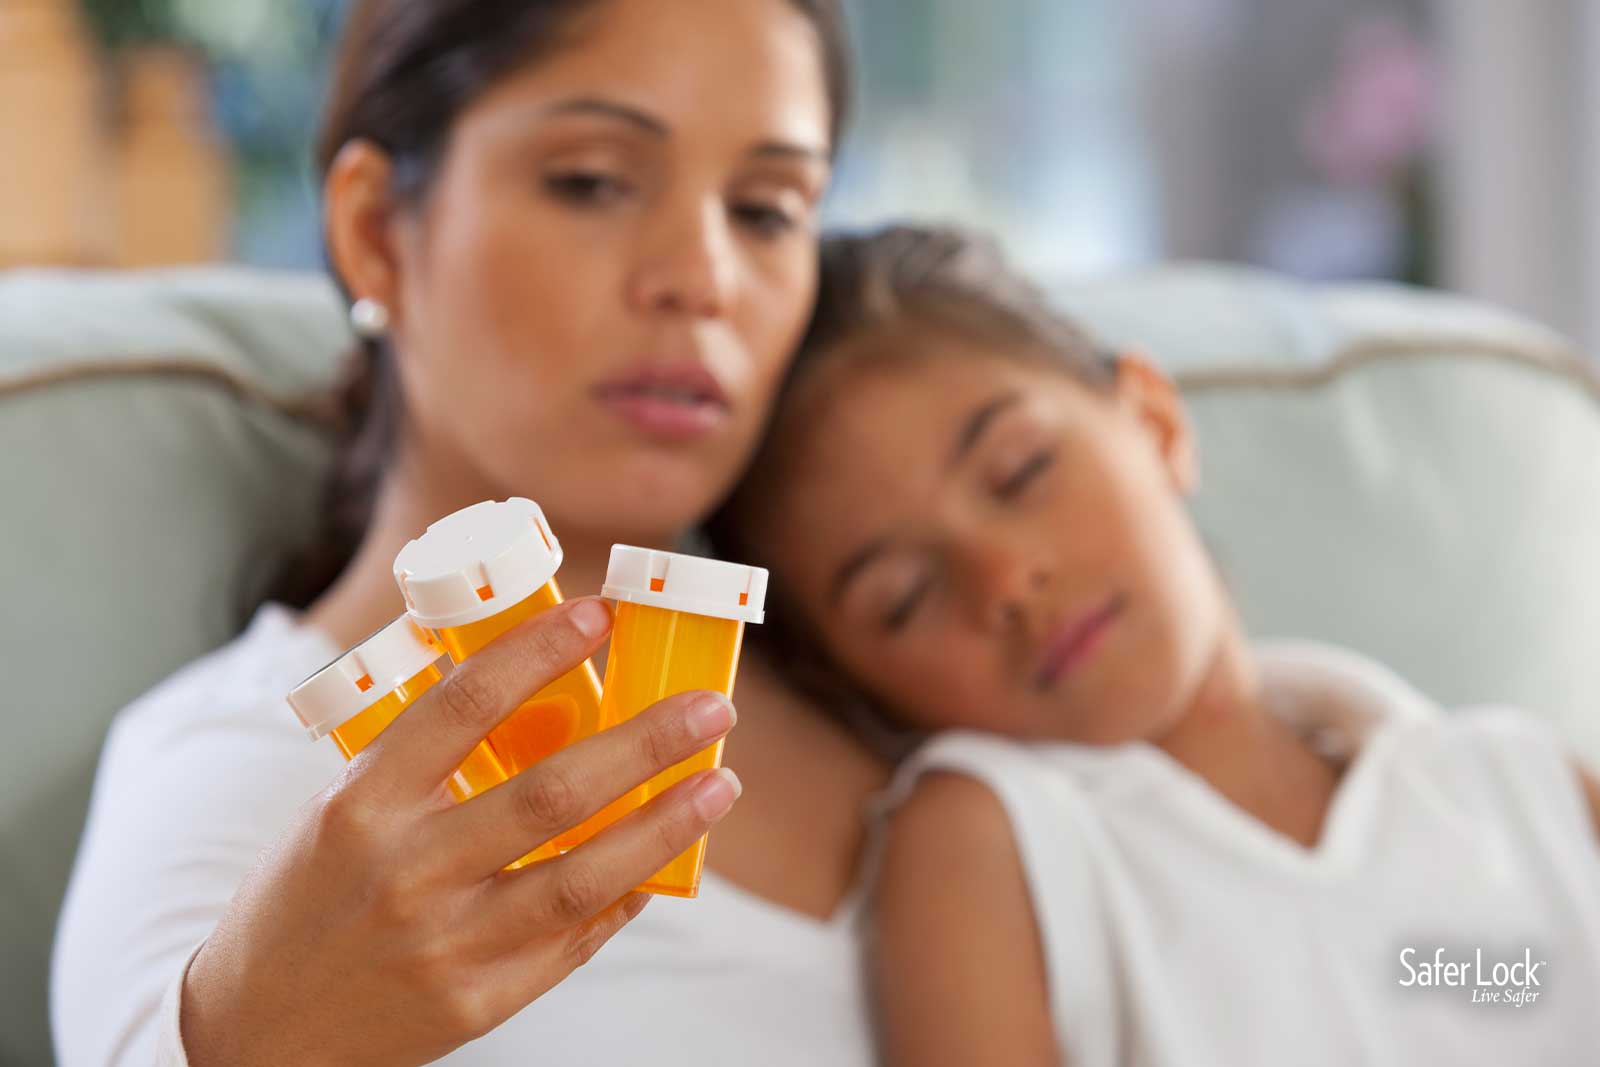 Medicine poisoning and prescription drug misuse pose unique dangers to families with children. Find out how to protect your kids from the medicines in your home.